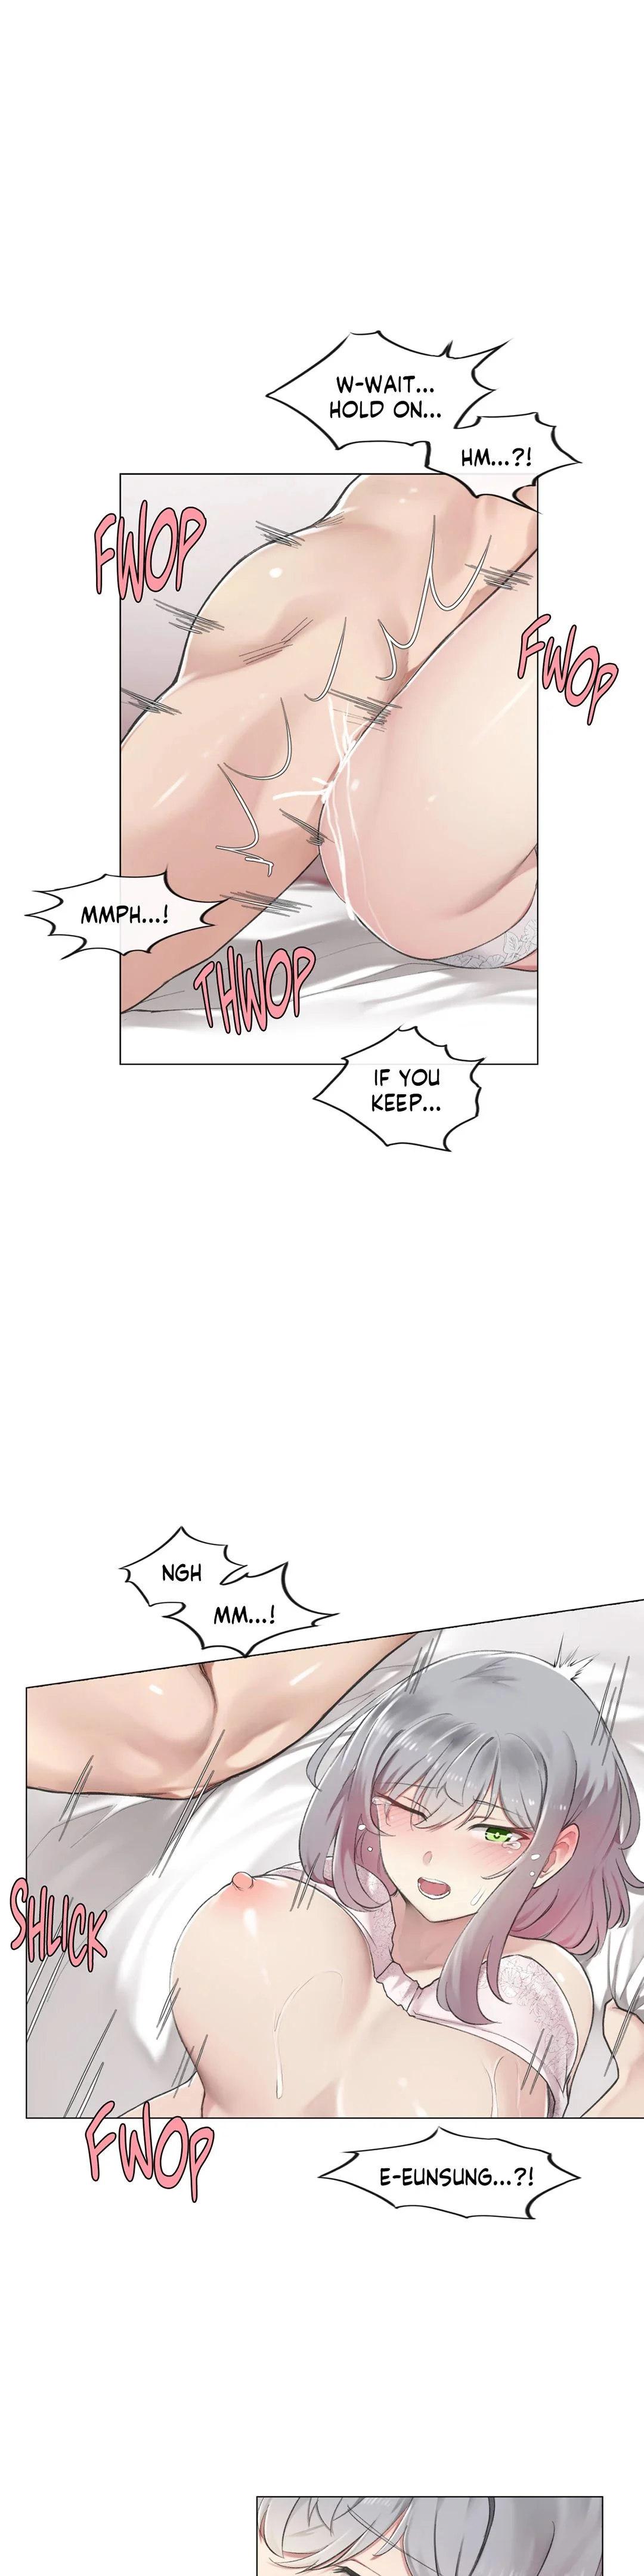 [Dumangoon, KONG_] Sexcape Room: Snap Off Ch.7/7 [English] [Manhwa PDF] Completed 116